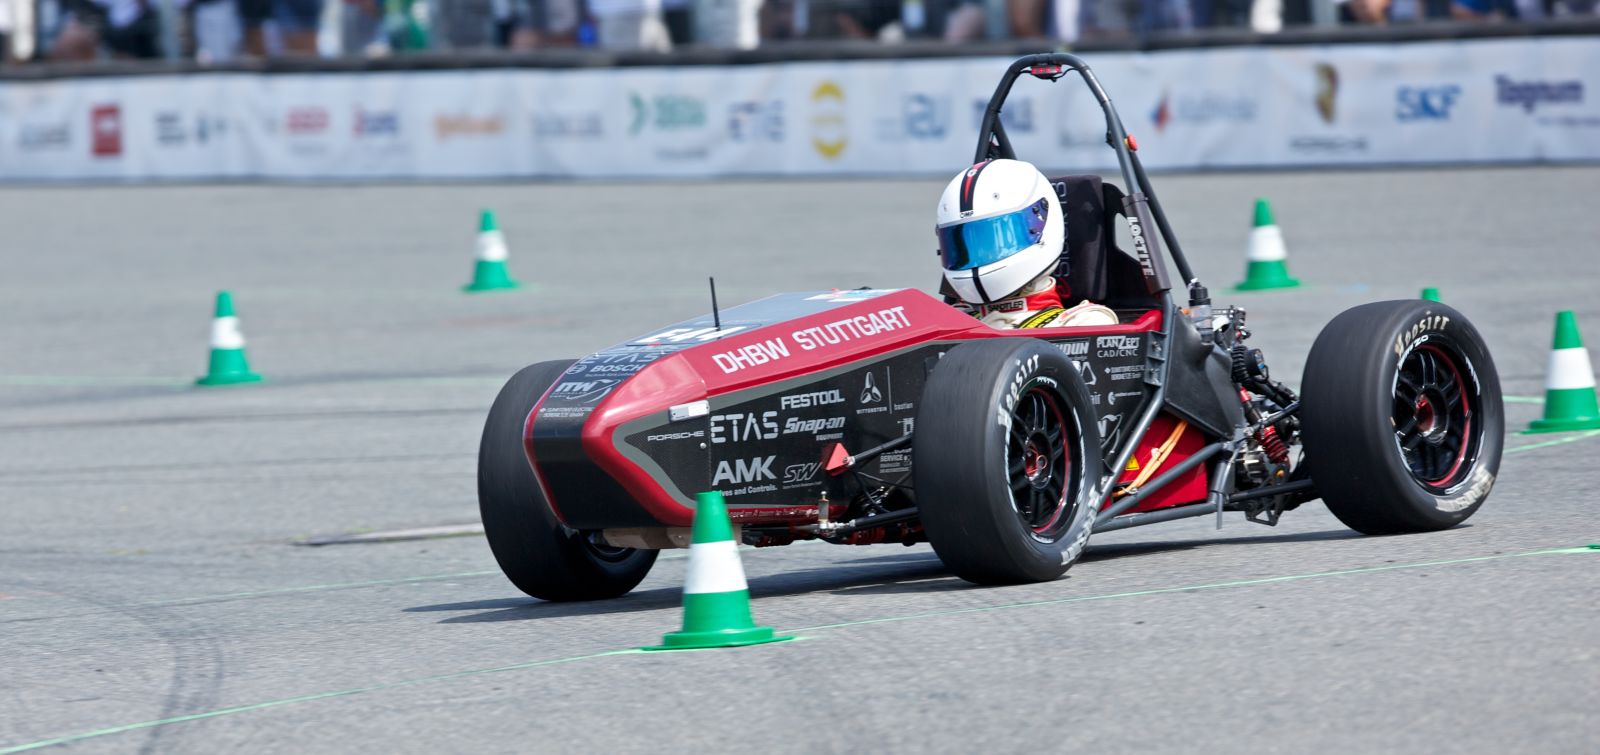 Illustration for article titled Would Formula SAE cars be too fast for most kart tracks?